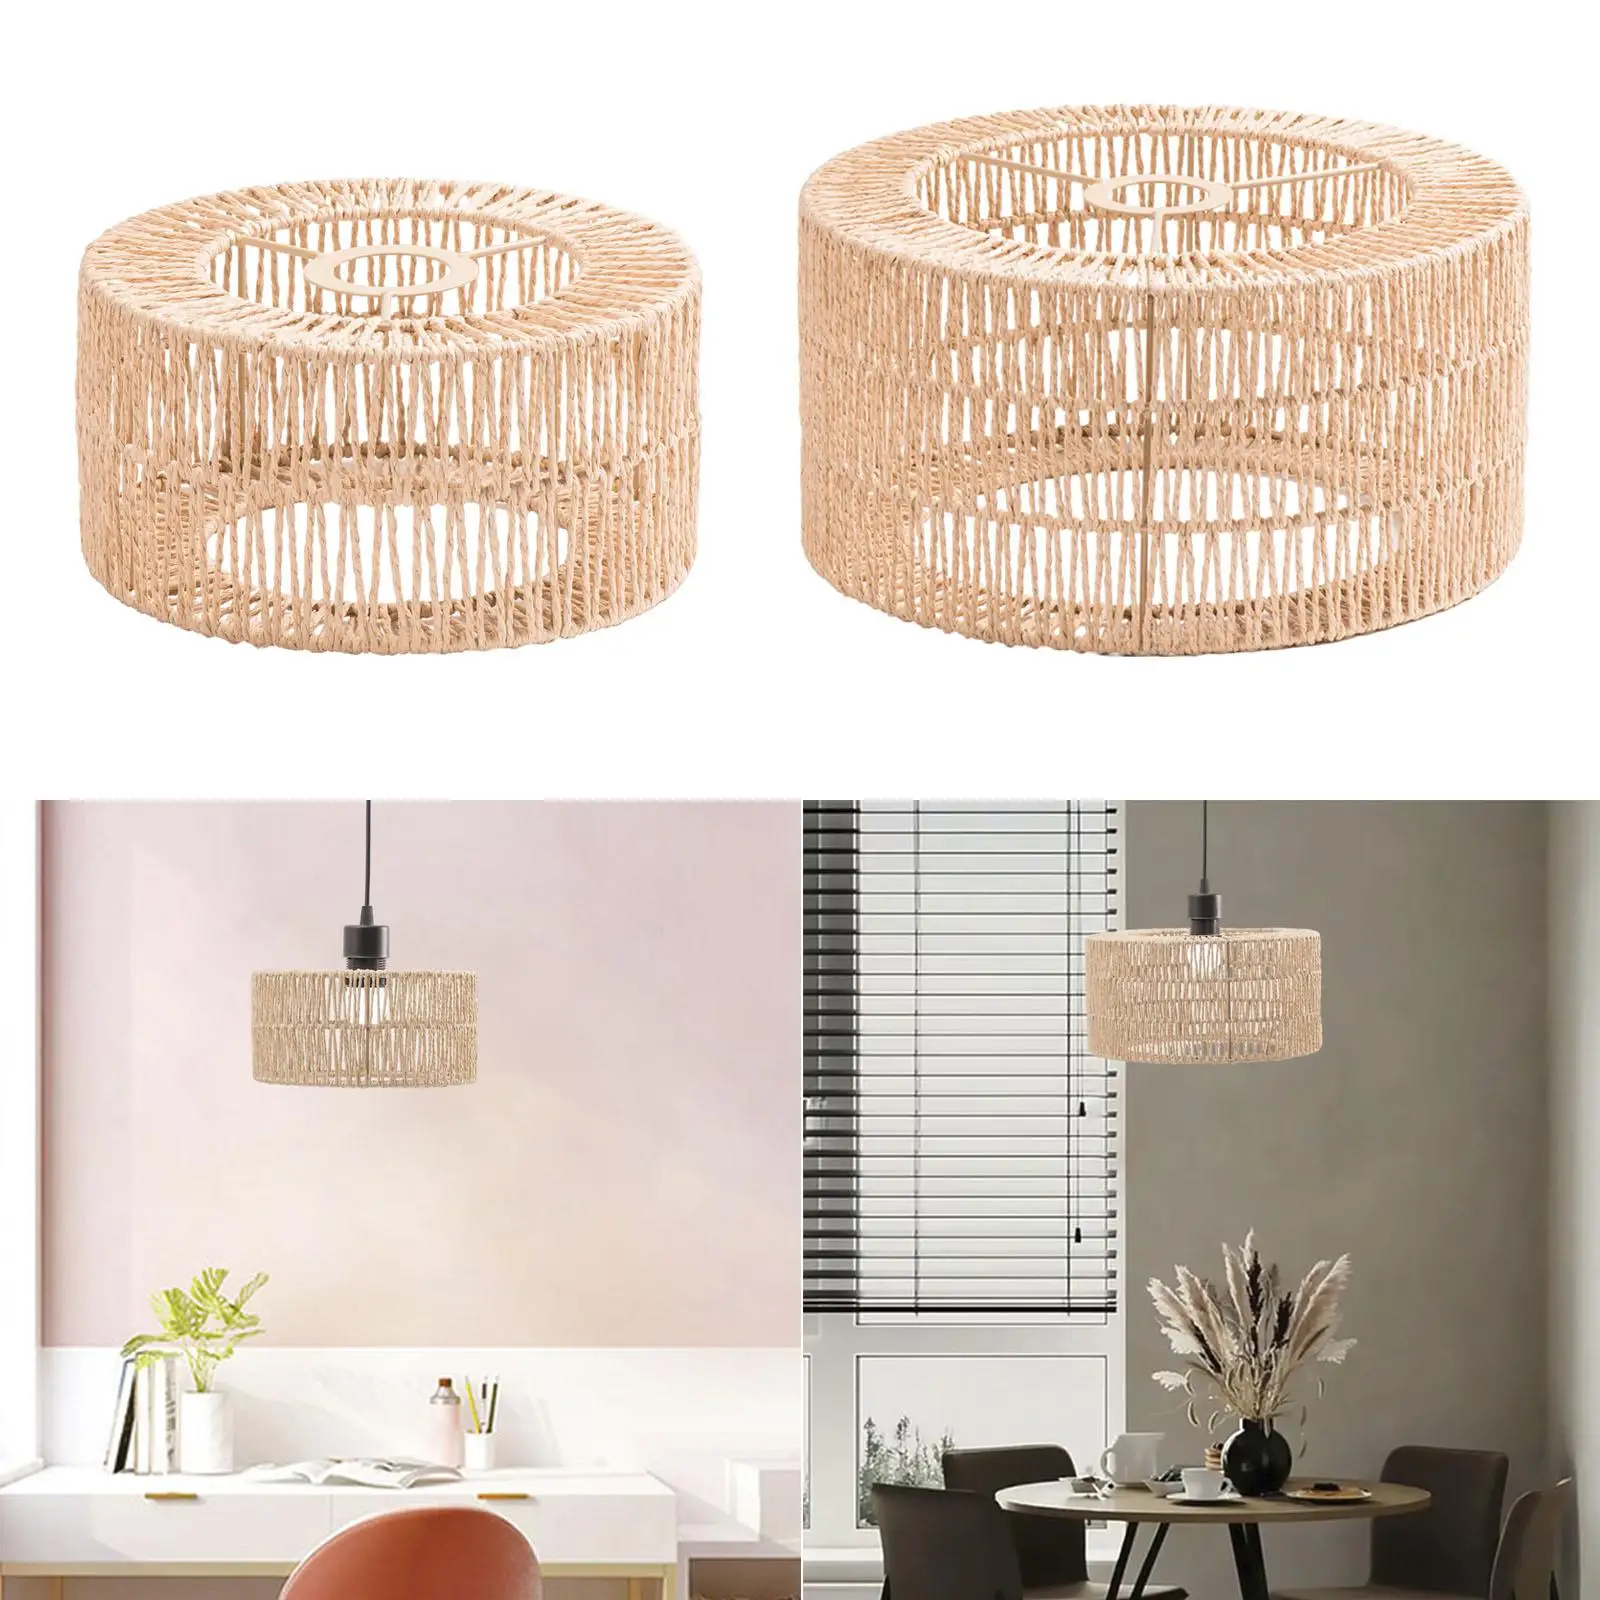 Paper Rope Lampshade Boho Rustic Pendant Light Cage Handwoven Lamp Shade for Teahouse Outdoor Bedroom Restaurant Kitchen Island